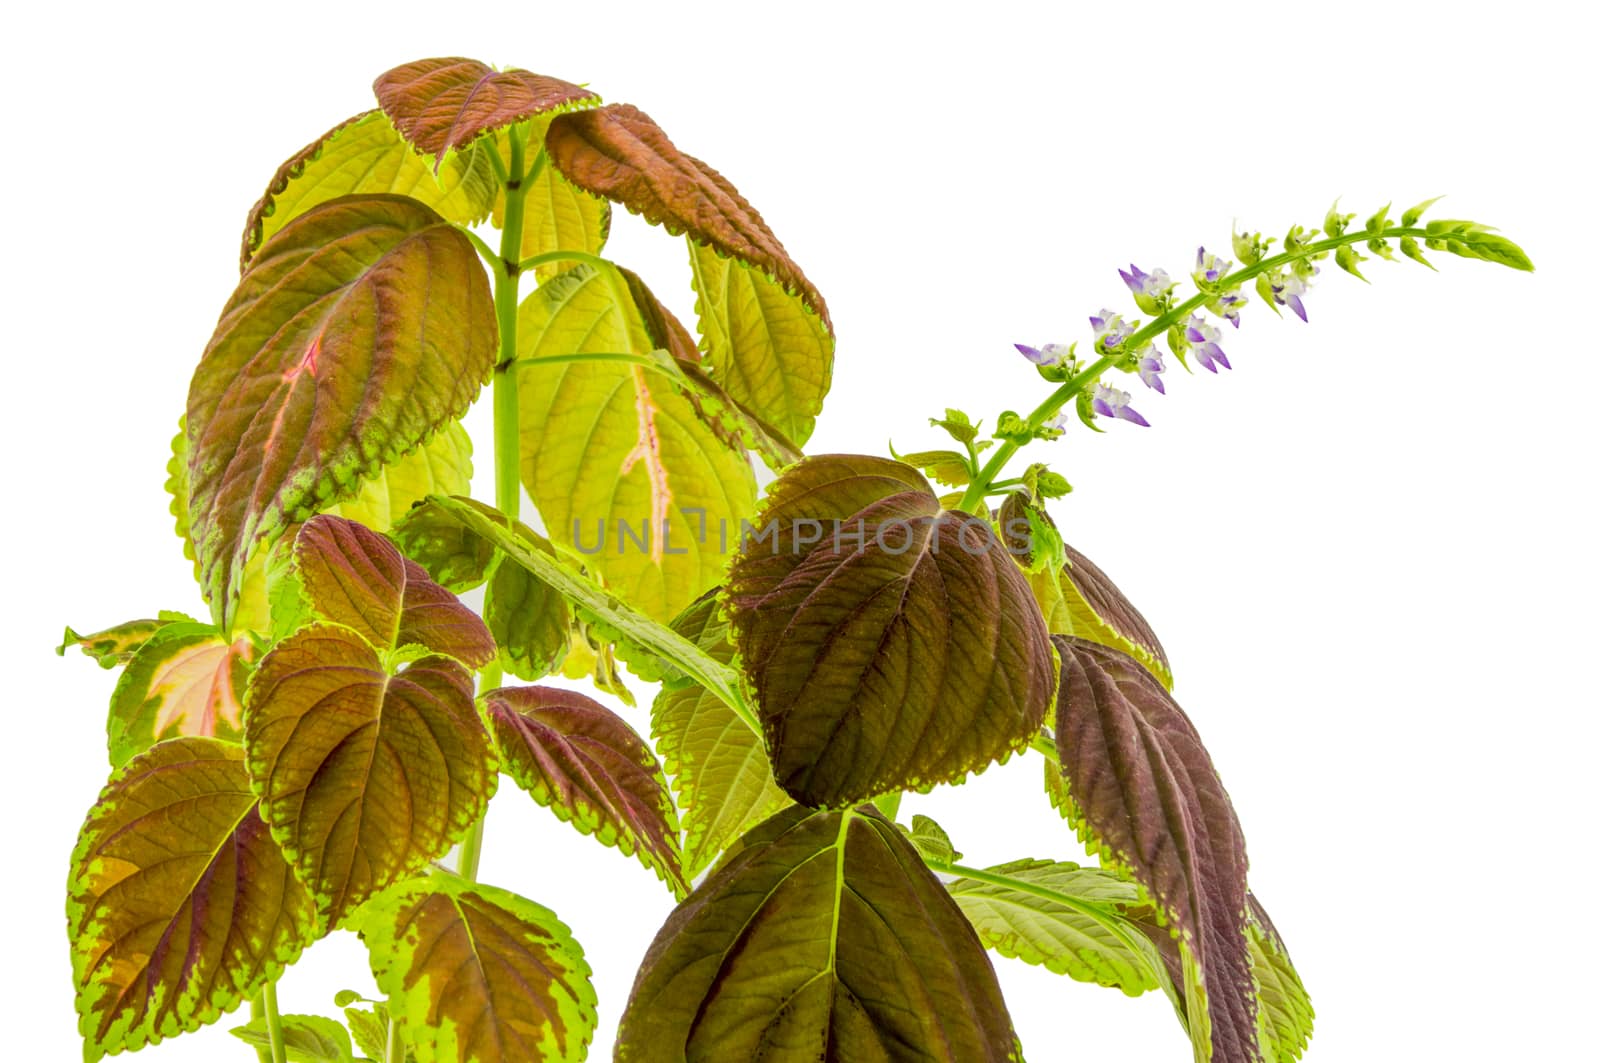 Coleus flowers isolated on white background. For your commercial and editorial use by serhii_lohvyniuk